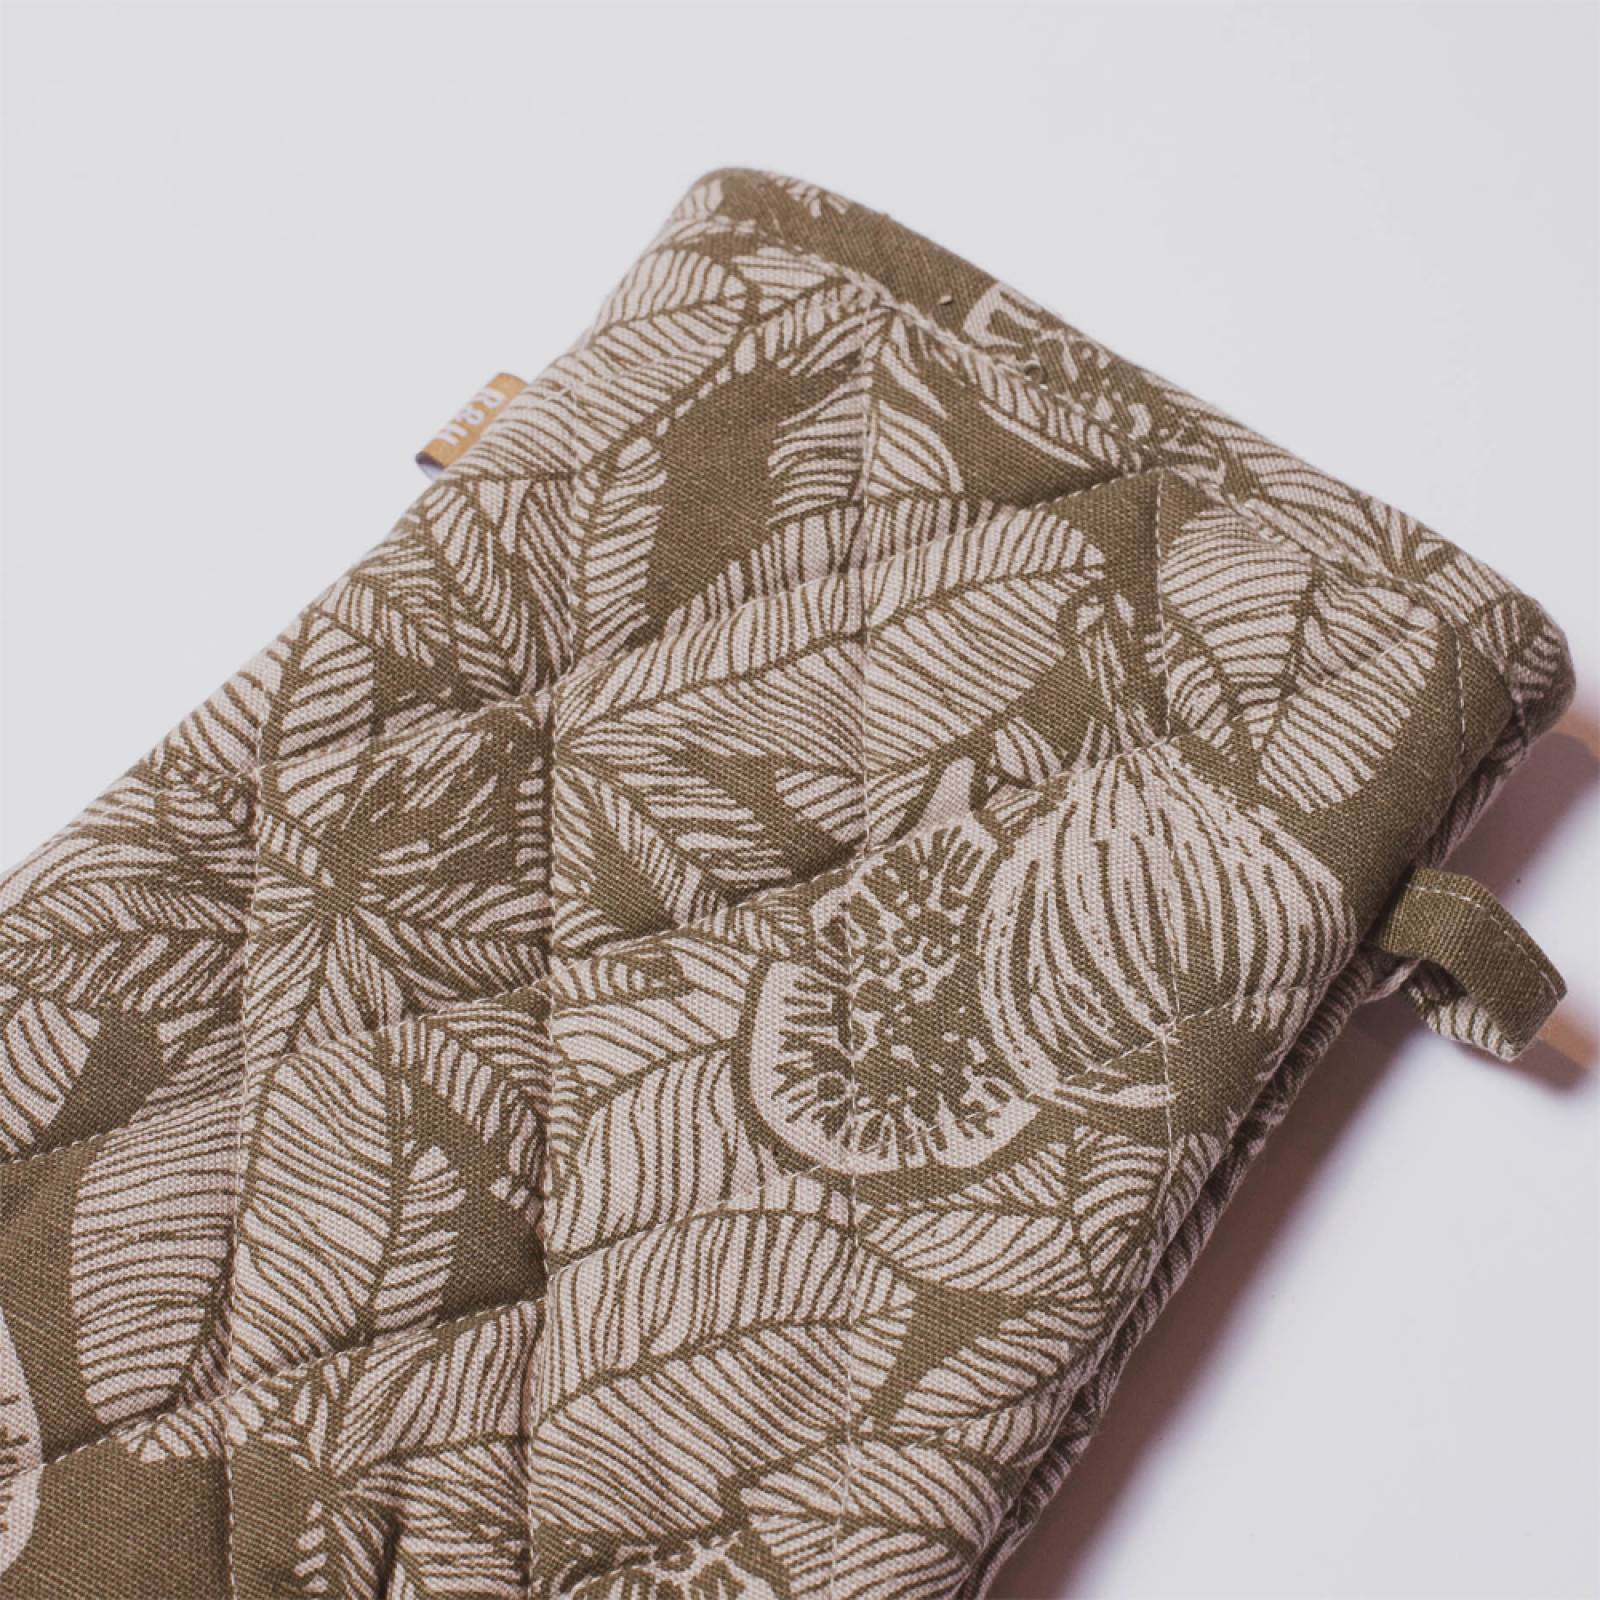 Cotton Oven Glove In Burnt Olive Fig Tree Print thumbnails